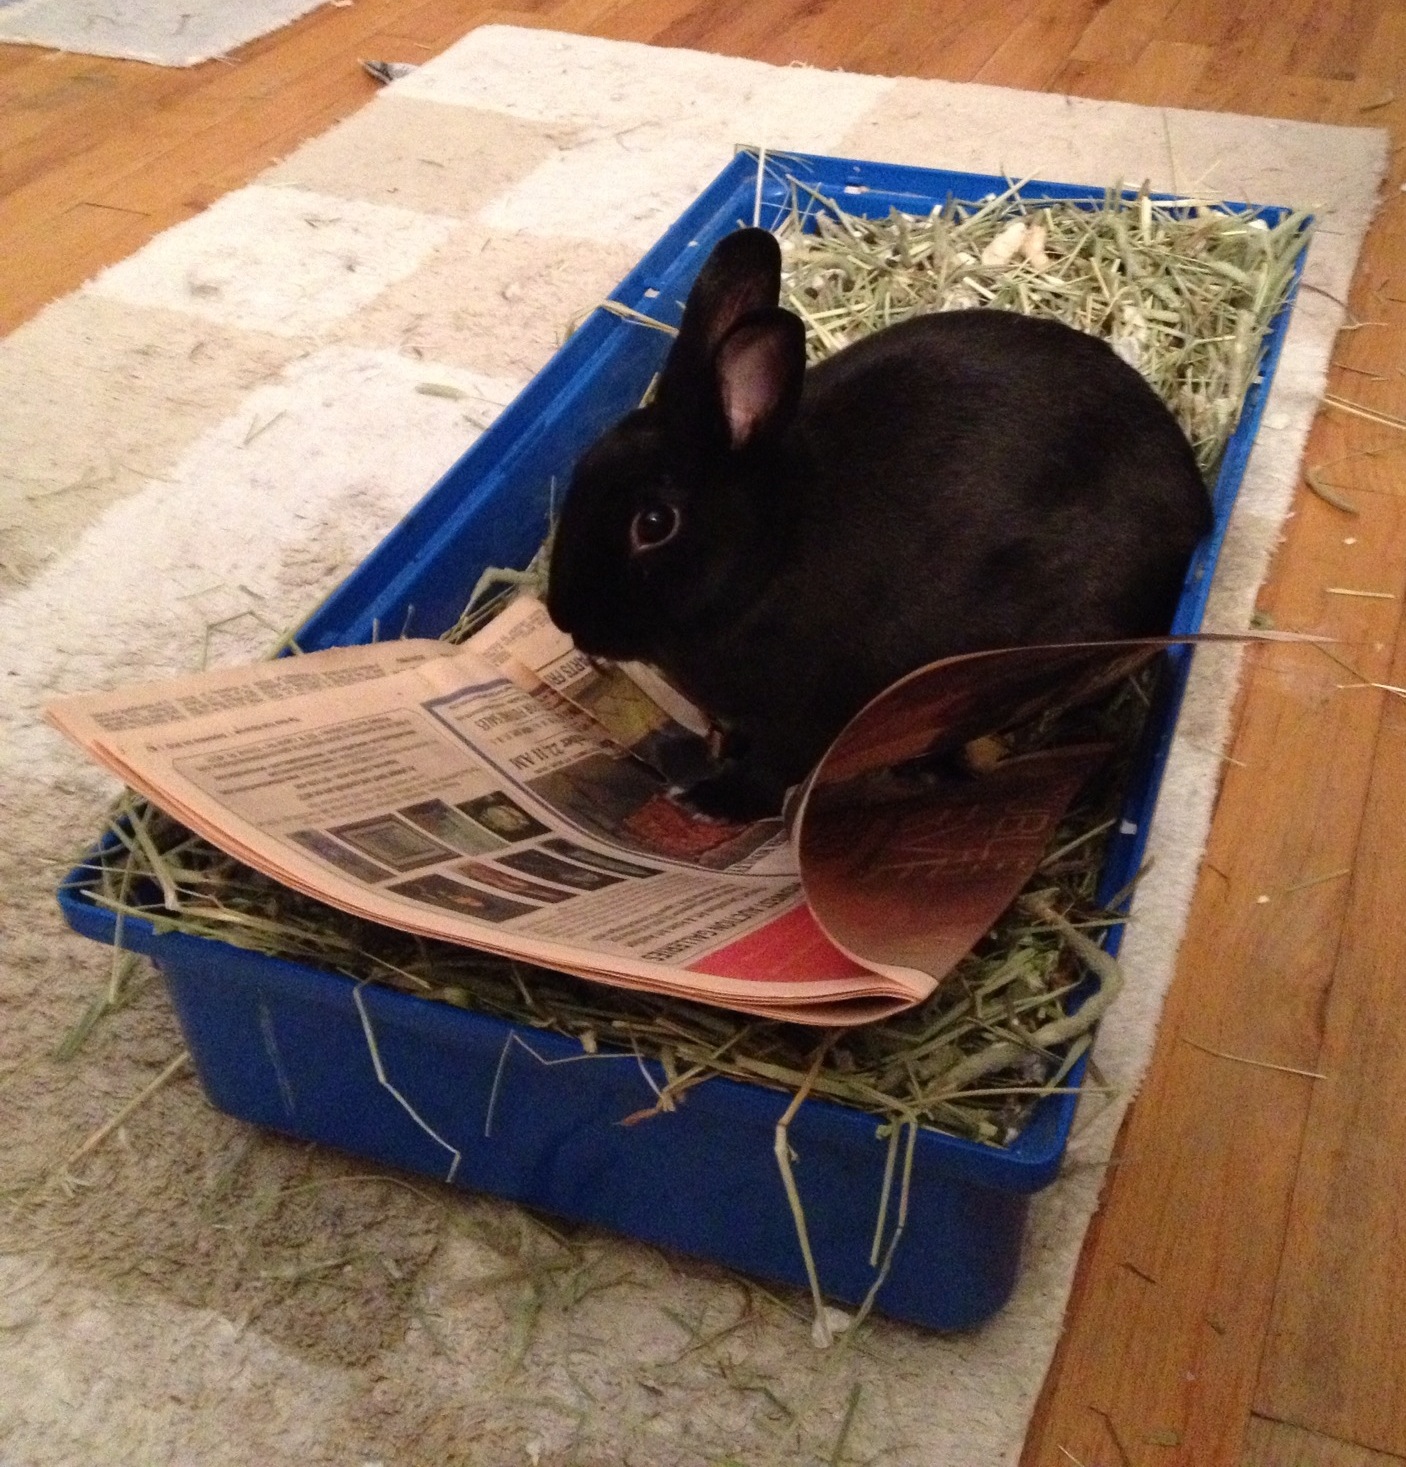 Bunny Reads the Paper in the Litterbox 